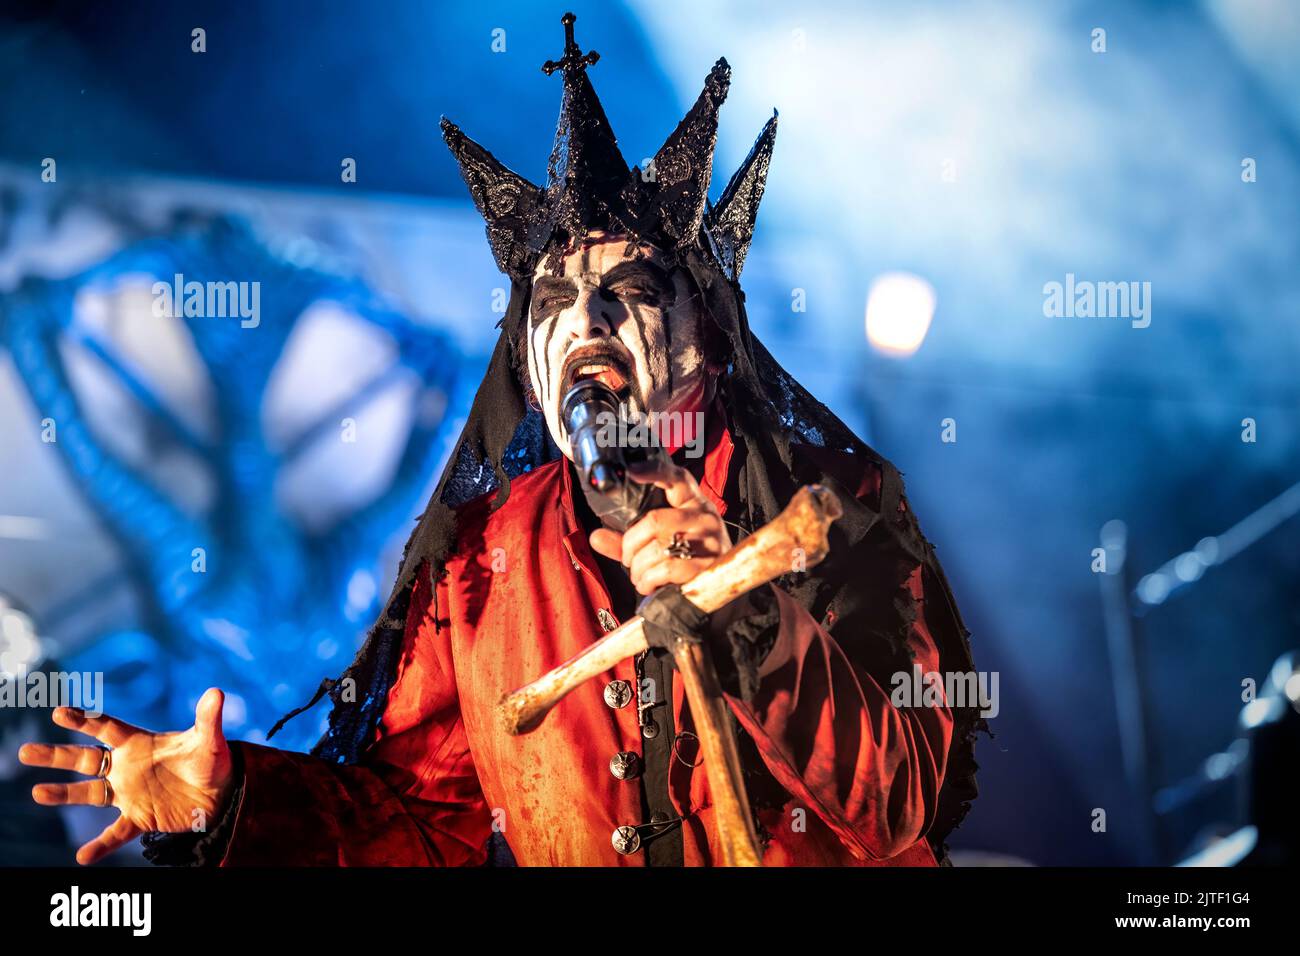 Solvesborg, Sweden. 10th, June 2022.The Danish heavy metal band Mercyful Fate performs a live concert during the Swedish music festival Sweden Rock Festival 2022 in Solvesborg. Here vocalist King Diamond is seen live on stage. (Photo credit: Gonzales Photo - Terje Dokken). Stock Photo